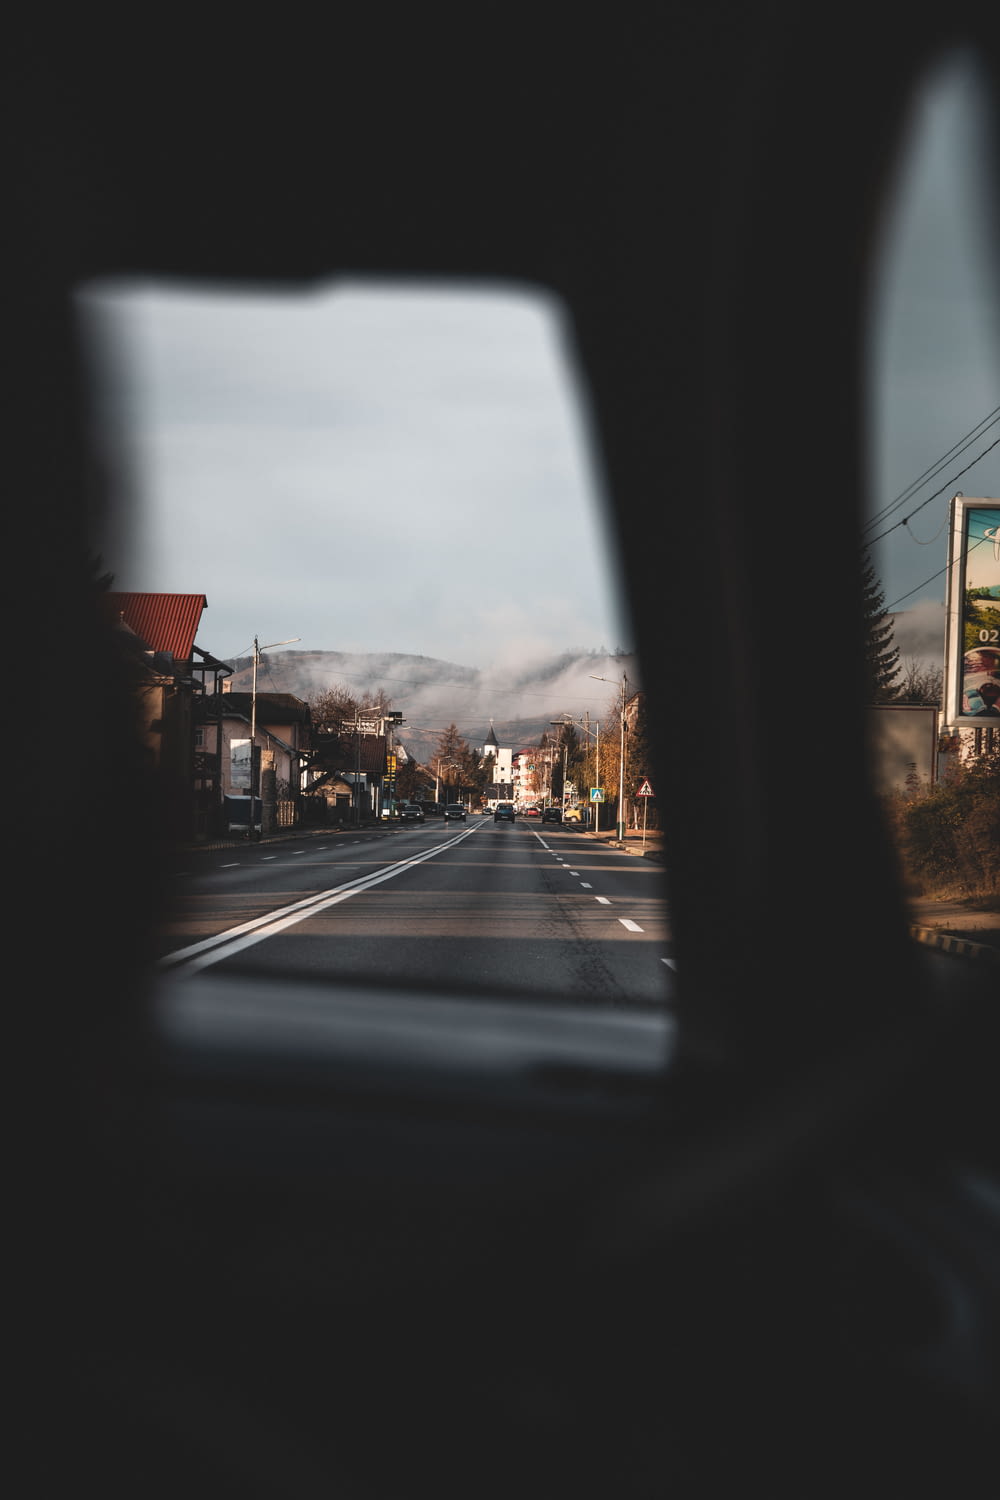 a view of a street from inside a vehicle